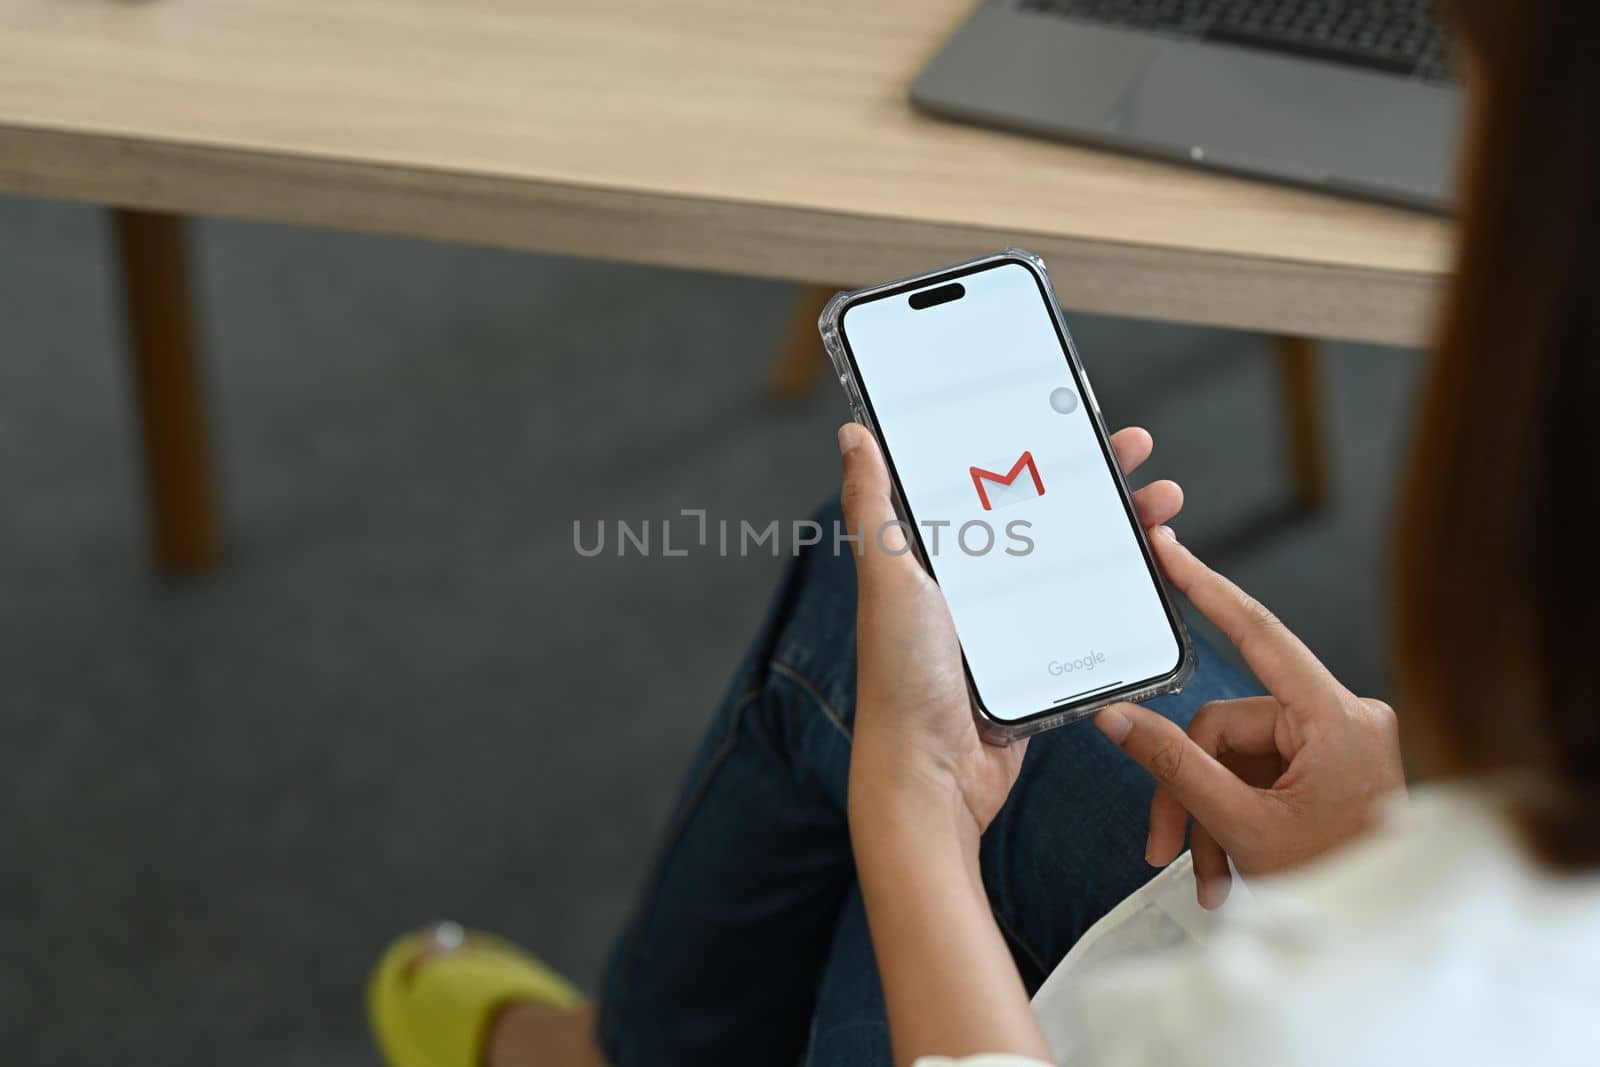 Chiang Mai, Thailand - Oct 08,2022: Woman iPhone 14 Pro Max with Gmail app on screen. Gmail is a free email service from Google by prathanchorruangsak